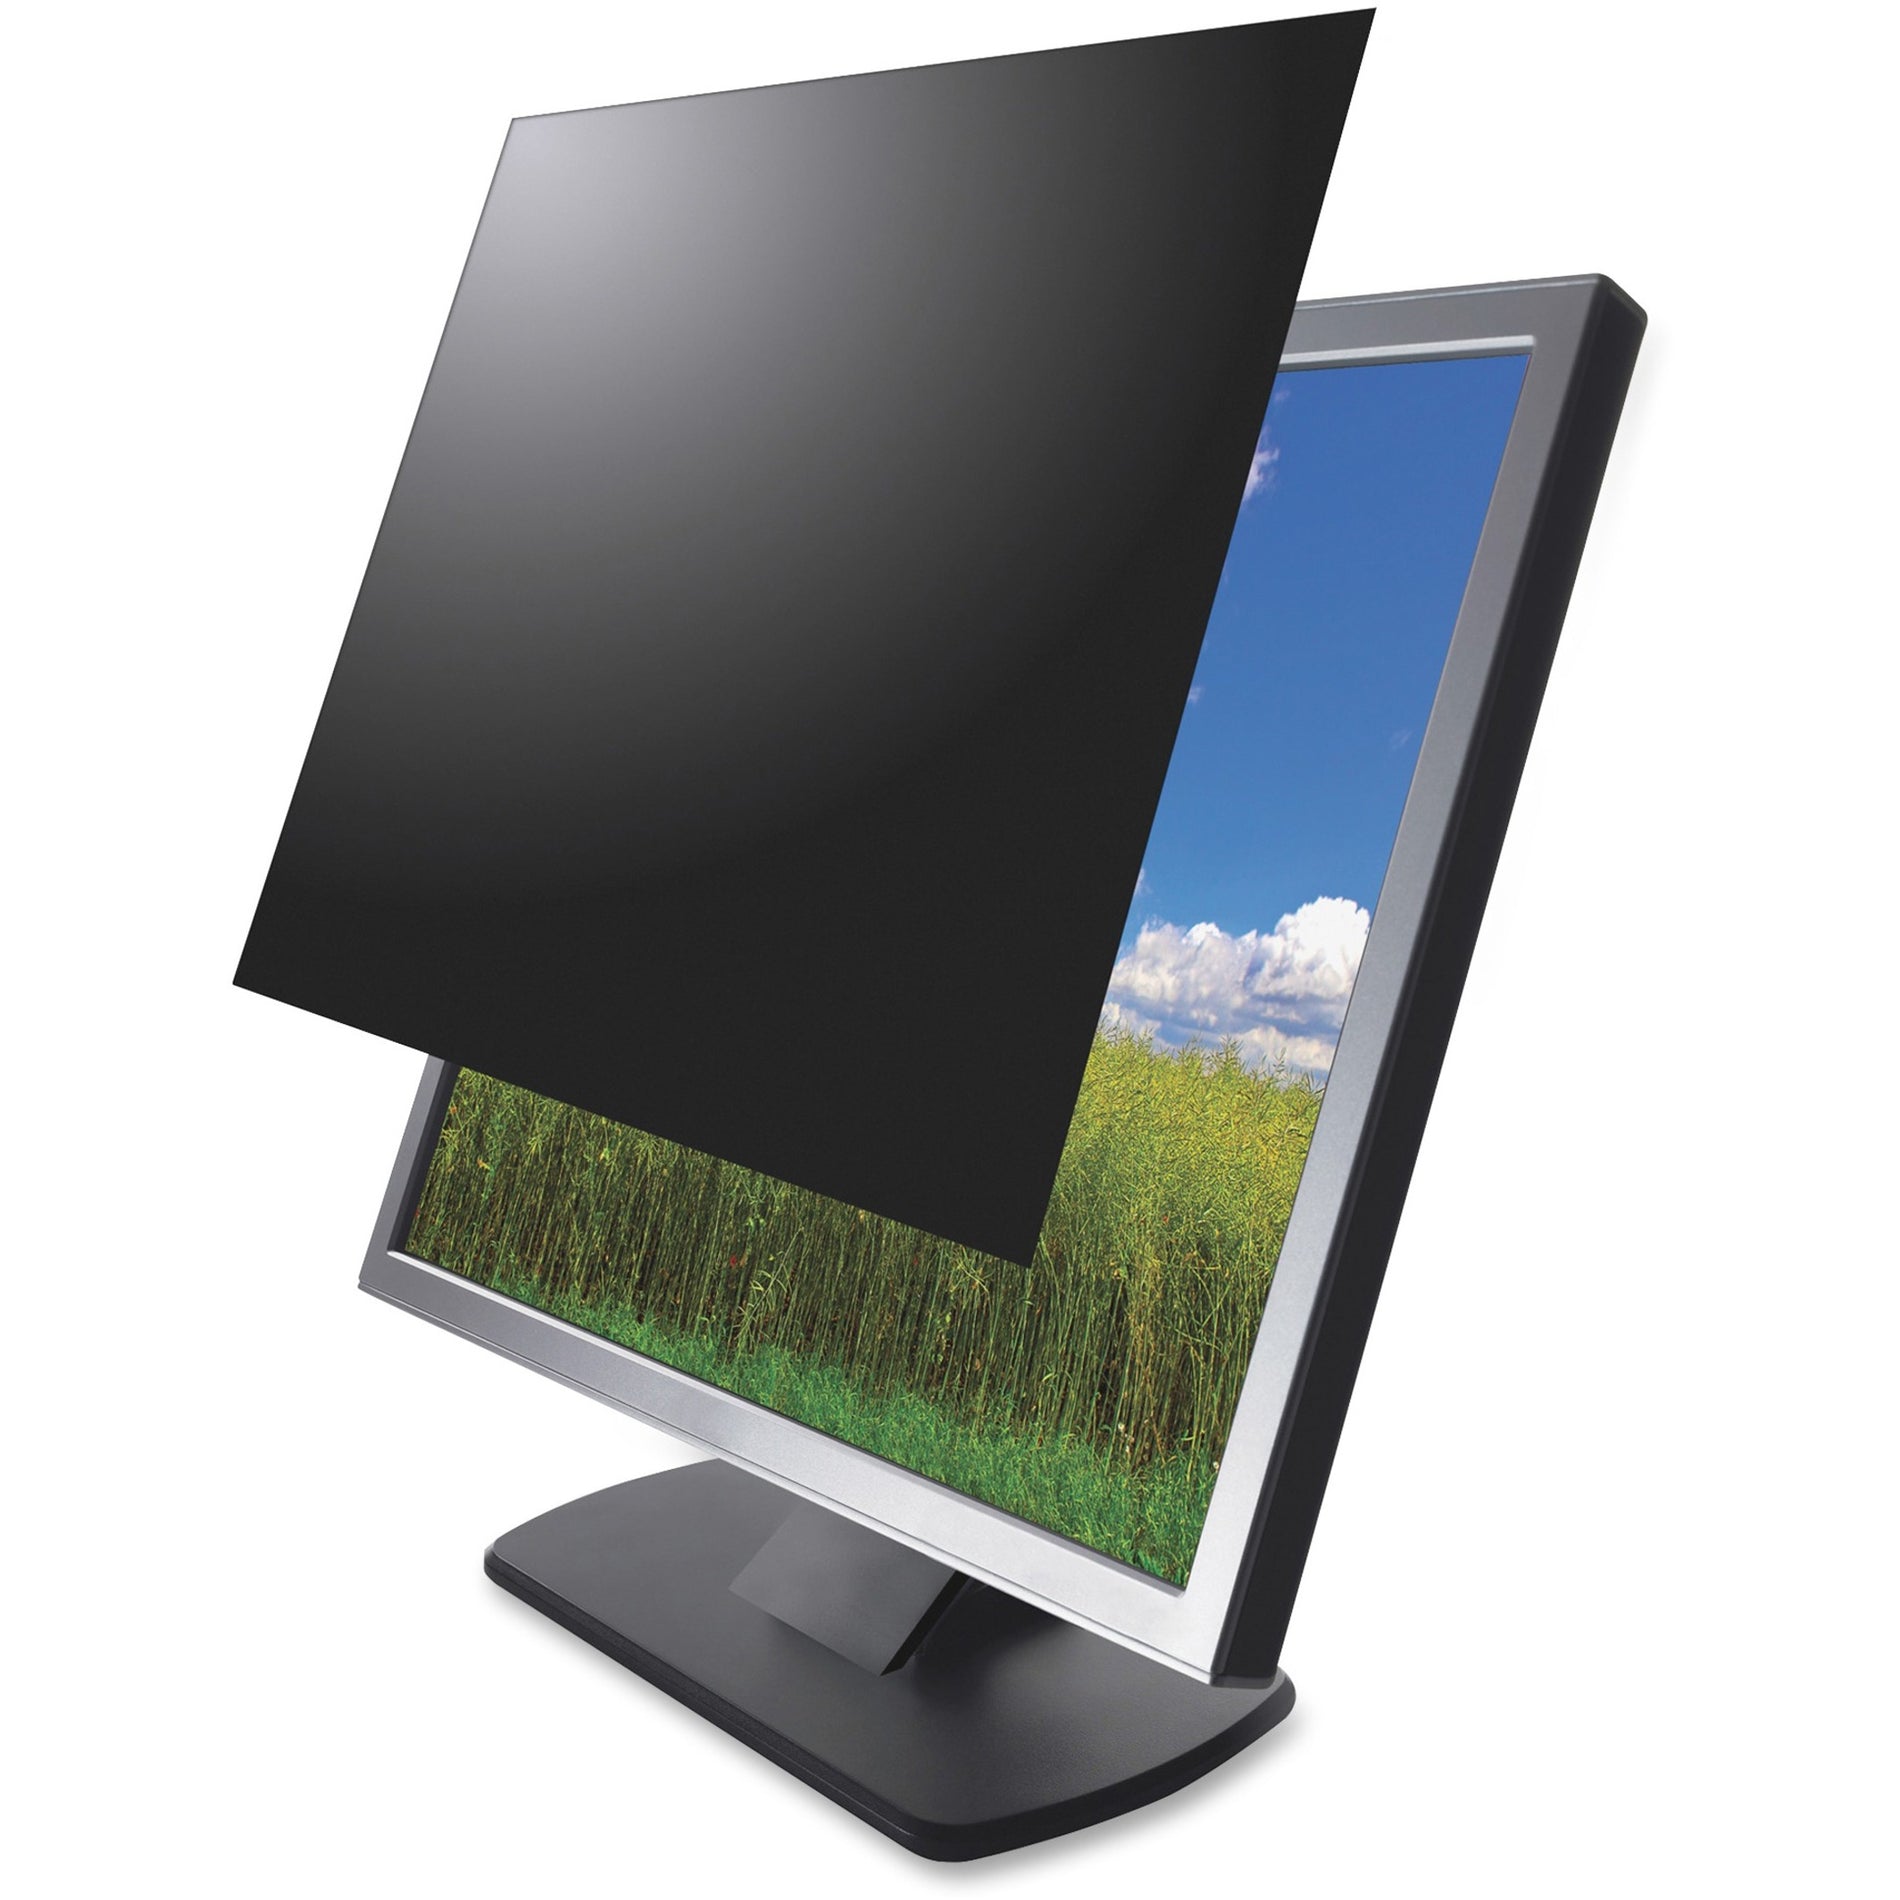 Kantek SVL24W9 Secure-View Fresnel Widescreen Monitor Magnifier Lens, Privacy Filter for 24" LCD Display, Black